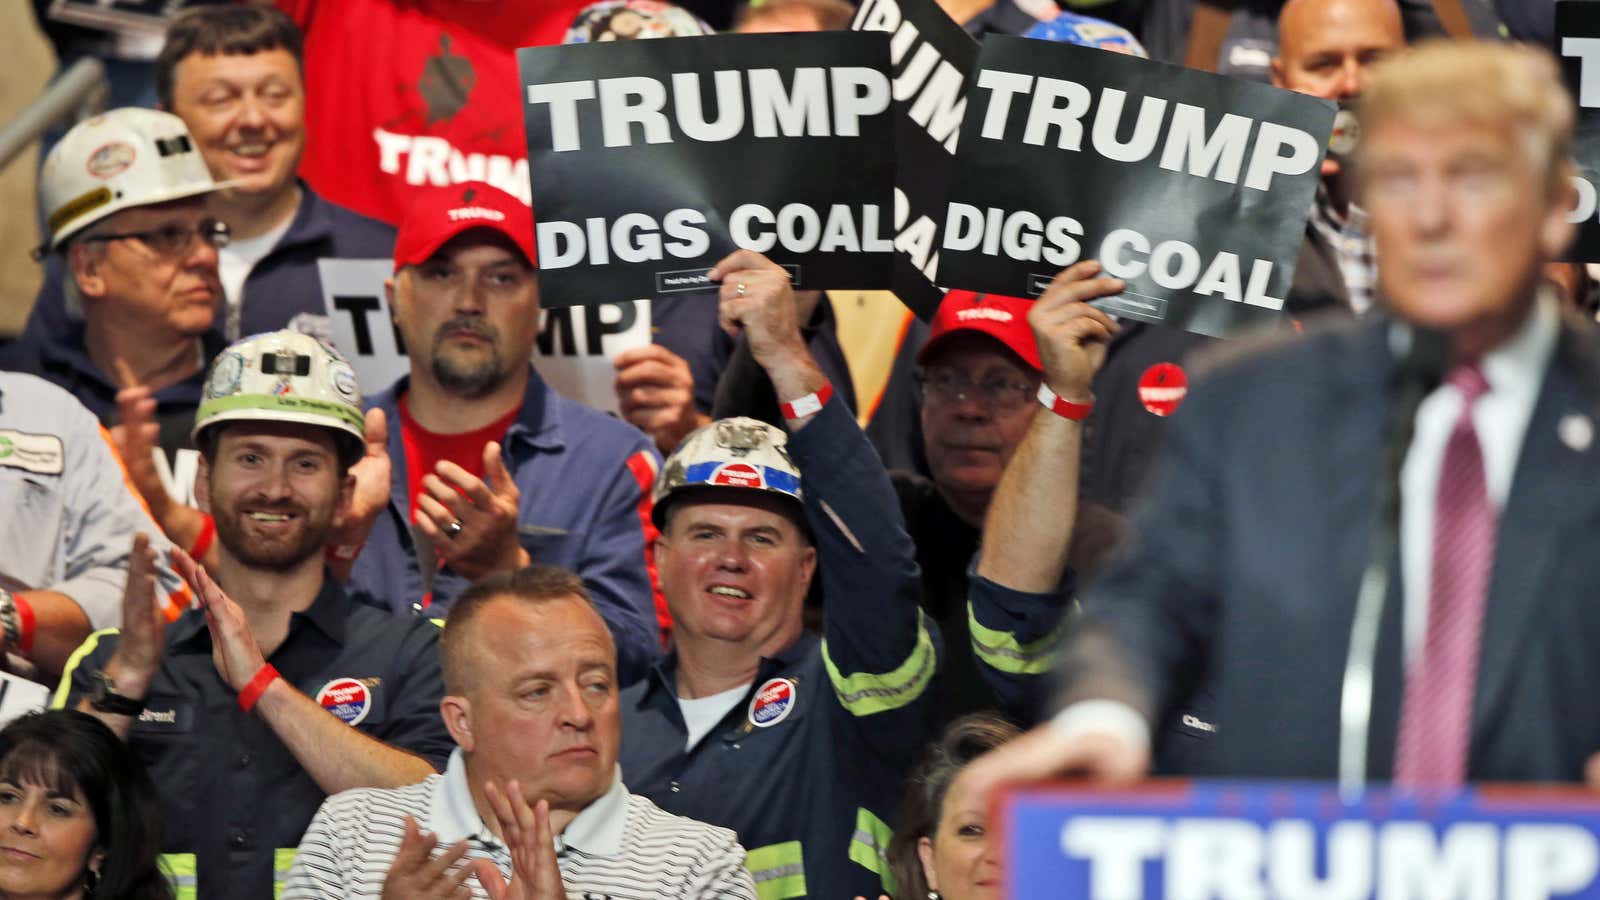 Trump will struggle to bring back his promised millions of coal jobs in the face of market forces.